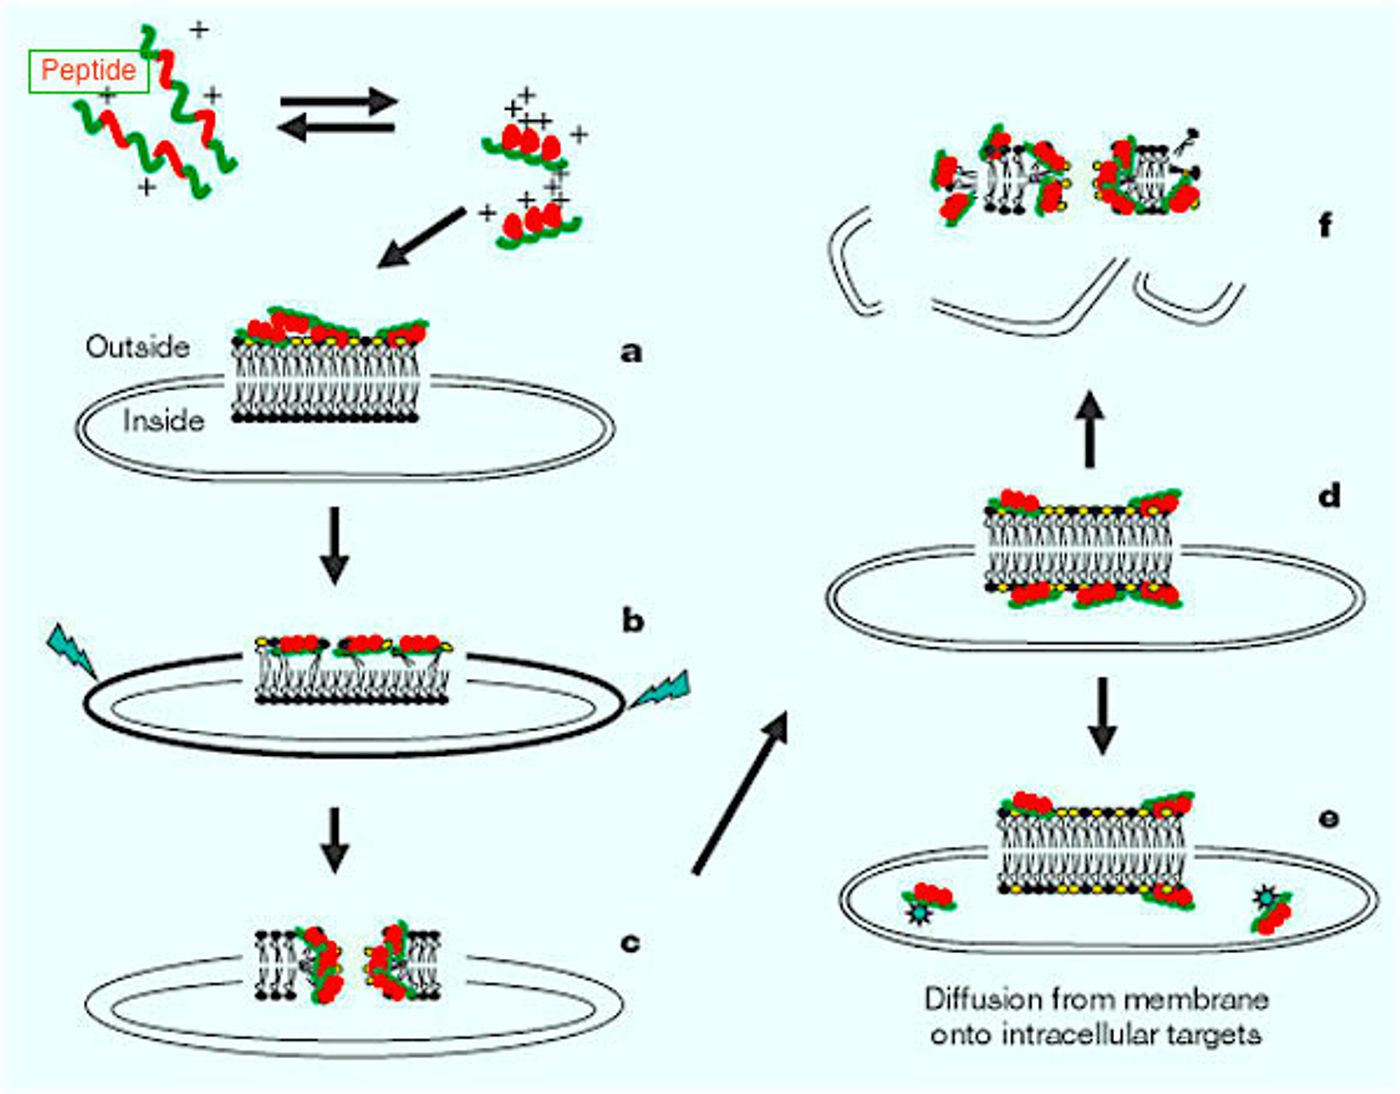 One mode of AMP efficacy: a) Membrane gets coated with peptides b) Peptide is integrated into the membrane, thinning the outer leaflet, resulting in strain within the bilayer (jagged arrows) c) Phase transition and pore formation d) Transport of lipids and peptides into the inner leaflet e) Diffusion of peptides onto intracellular targets (in some cases) f) Membrane collapses into fragments, physically disrupting the target cell's membrane Image: Nature